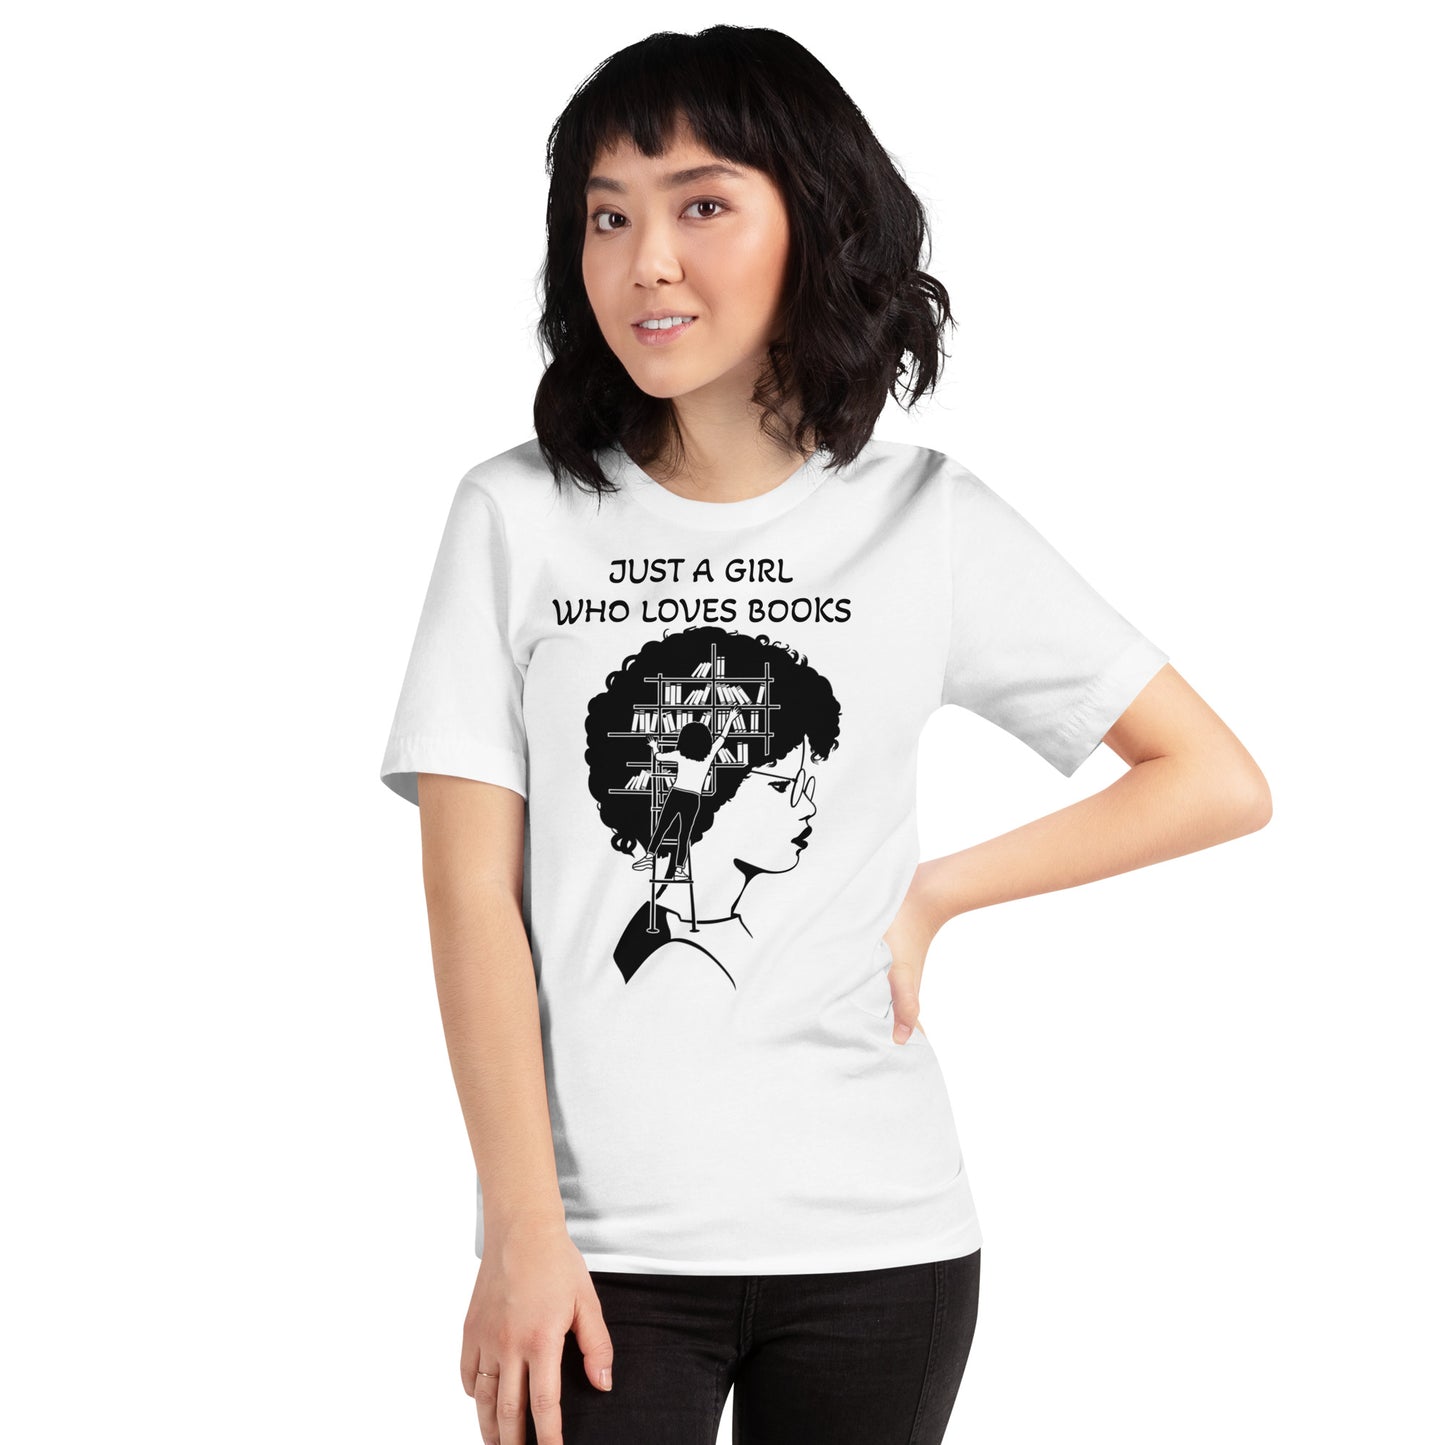 JUST A GIRL WHO LOVES BOOKS- Unisex t-shirt